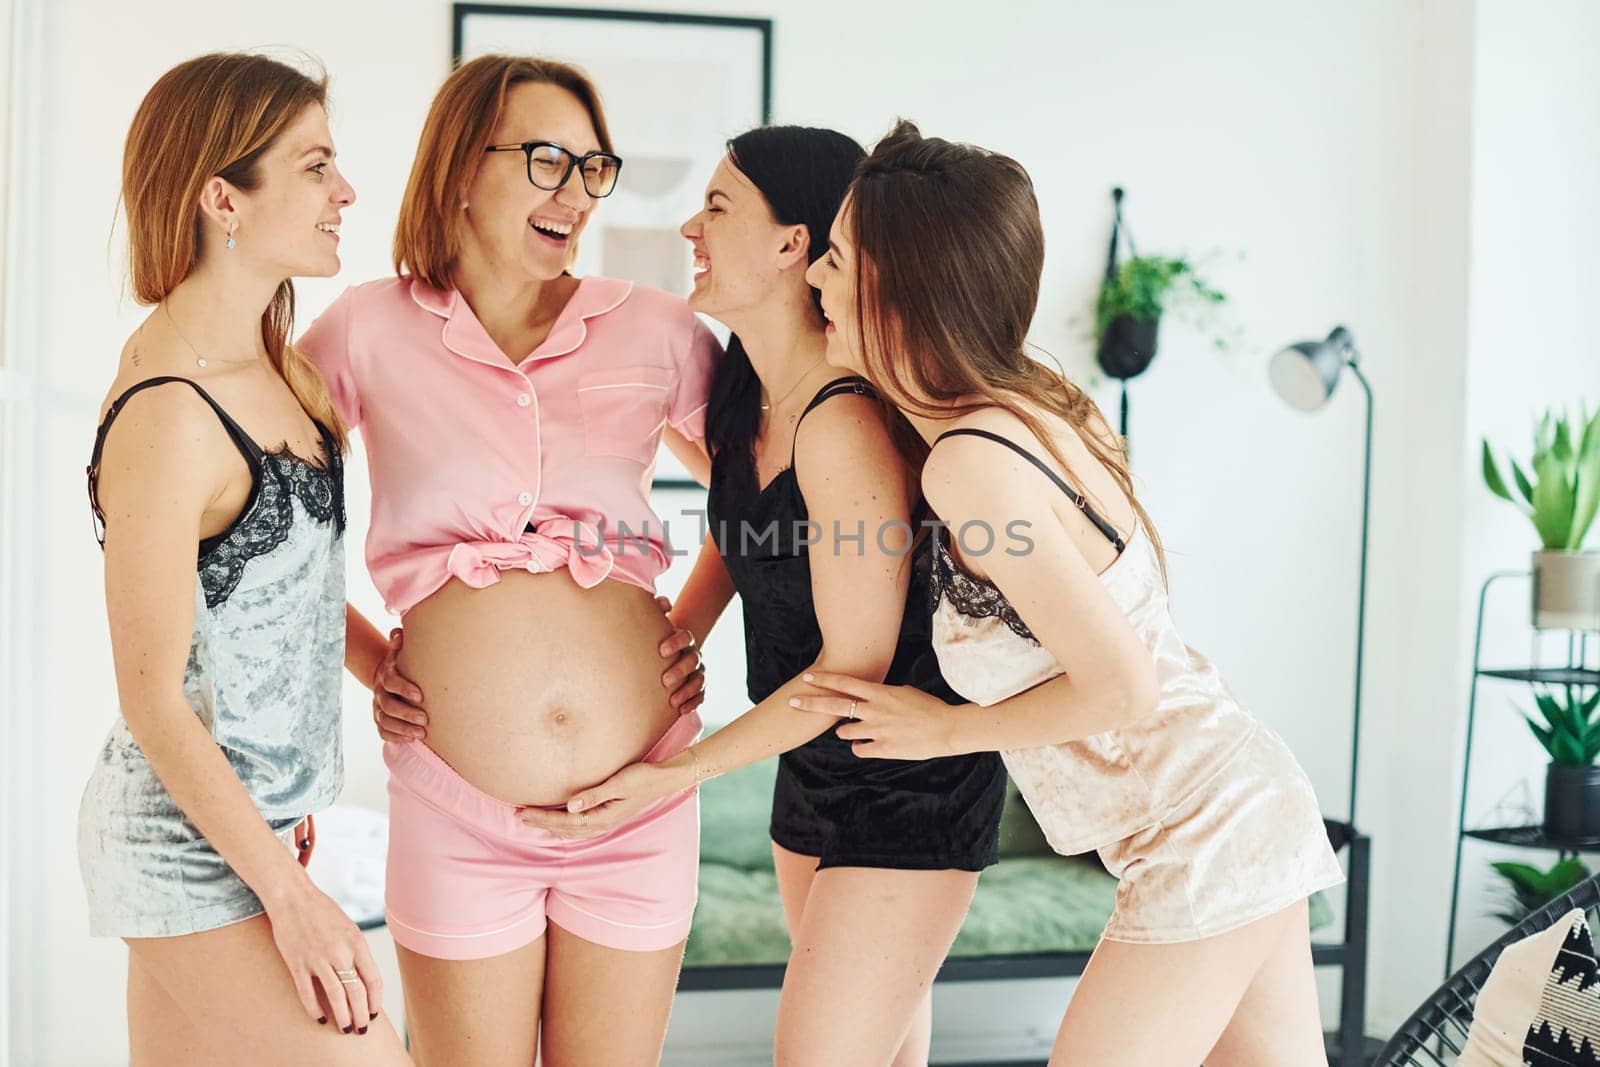 Cheerful young women with their pregnant friend in pajamas standing and have a party indoors at daytime together.